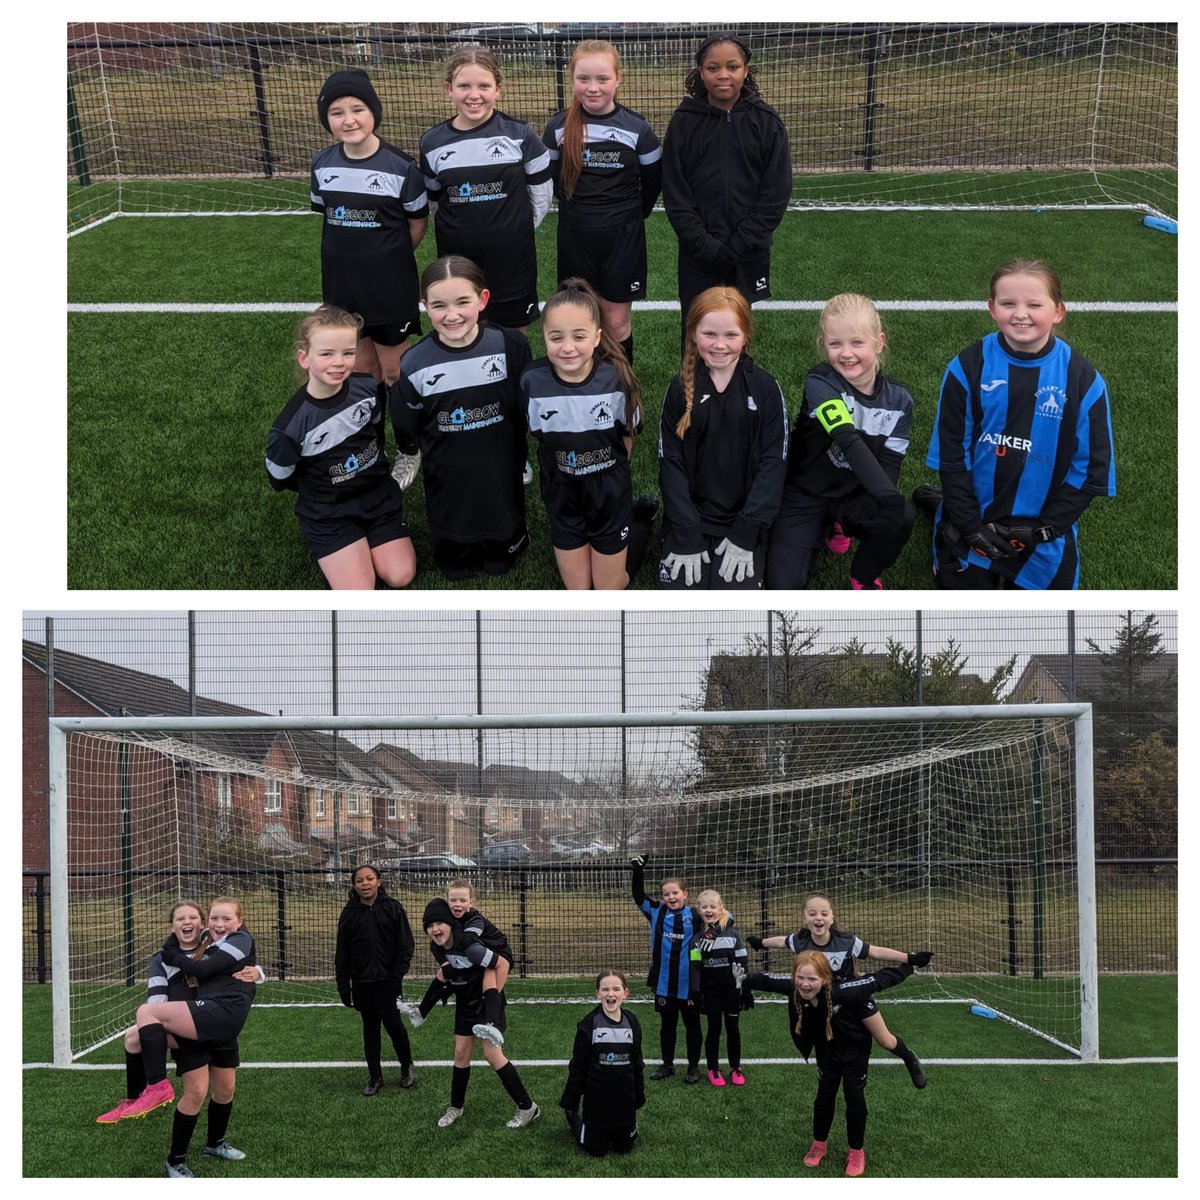 Well done to our under 10 blacks today 🖤. A great performance playing some nice football keep it up girls the hard work is paying off 💪🏼 💙🖤.  #girlsfootball #grassroots #under10s ⚽️